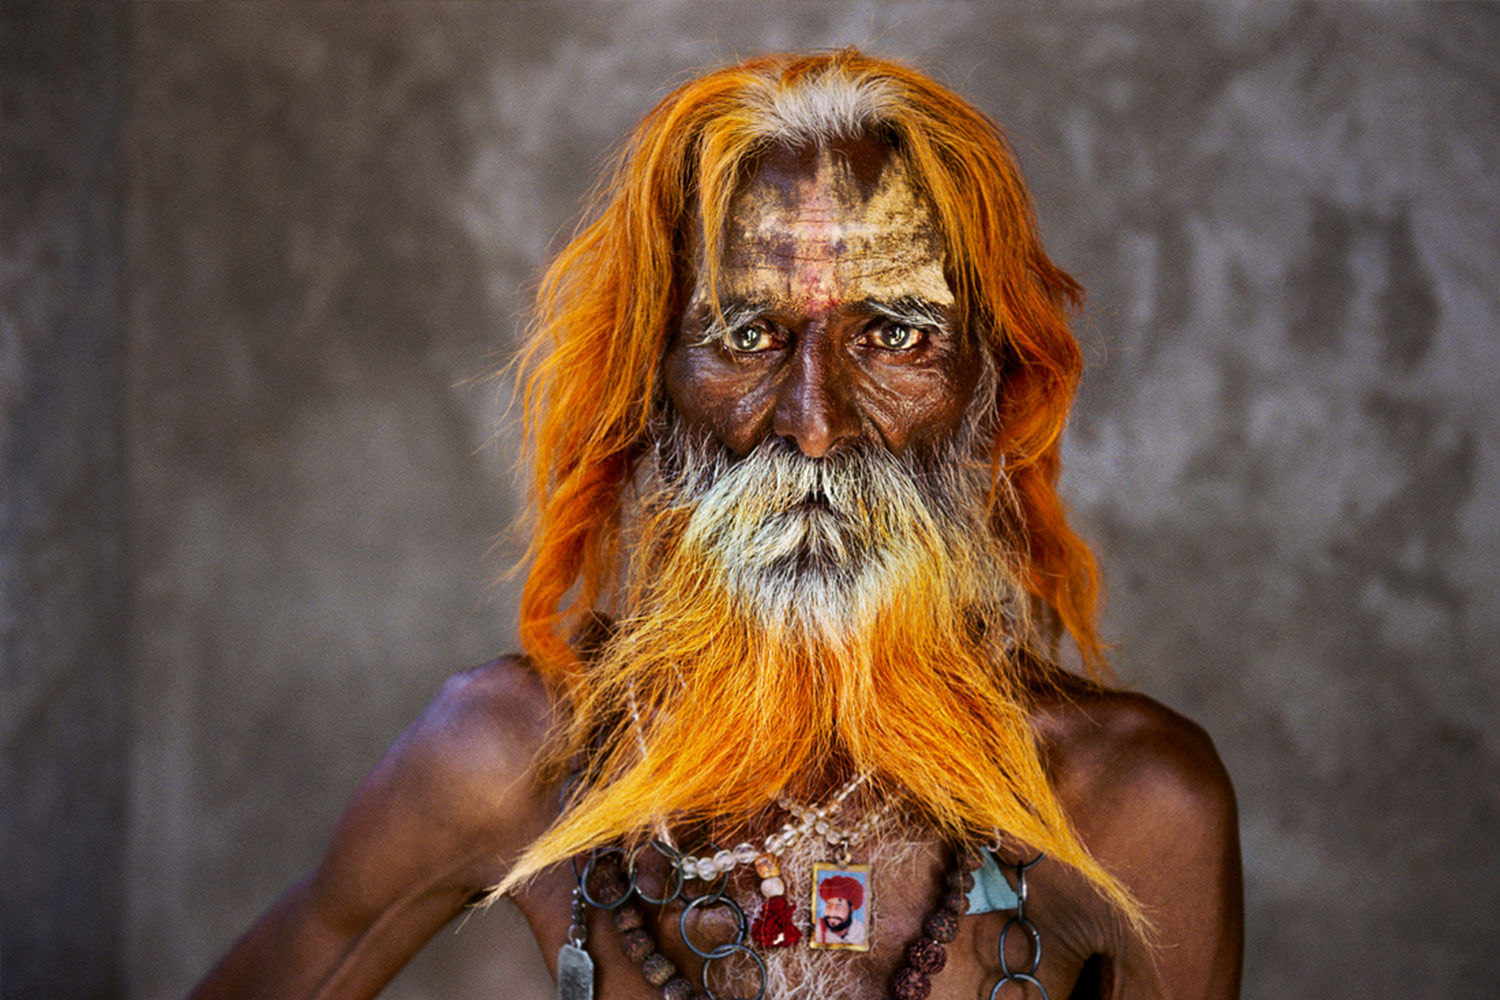 ICONS, the Steve McCurry exhibition